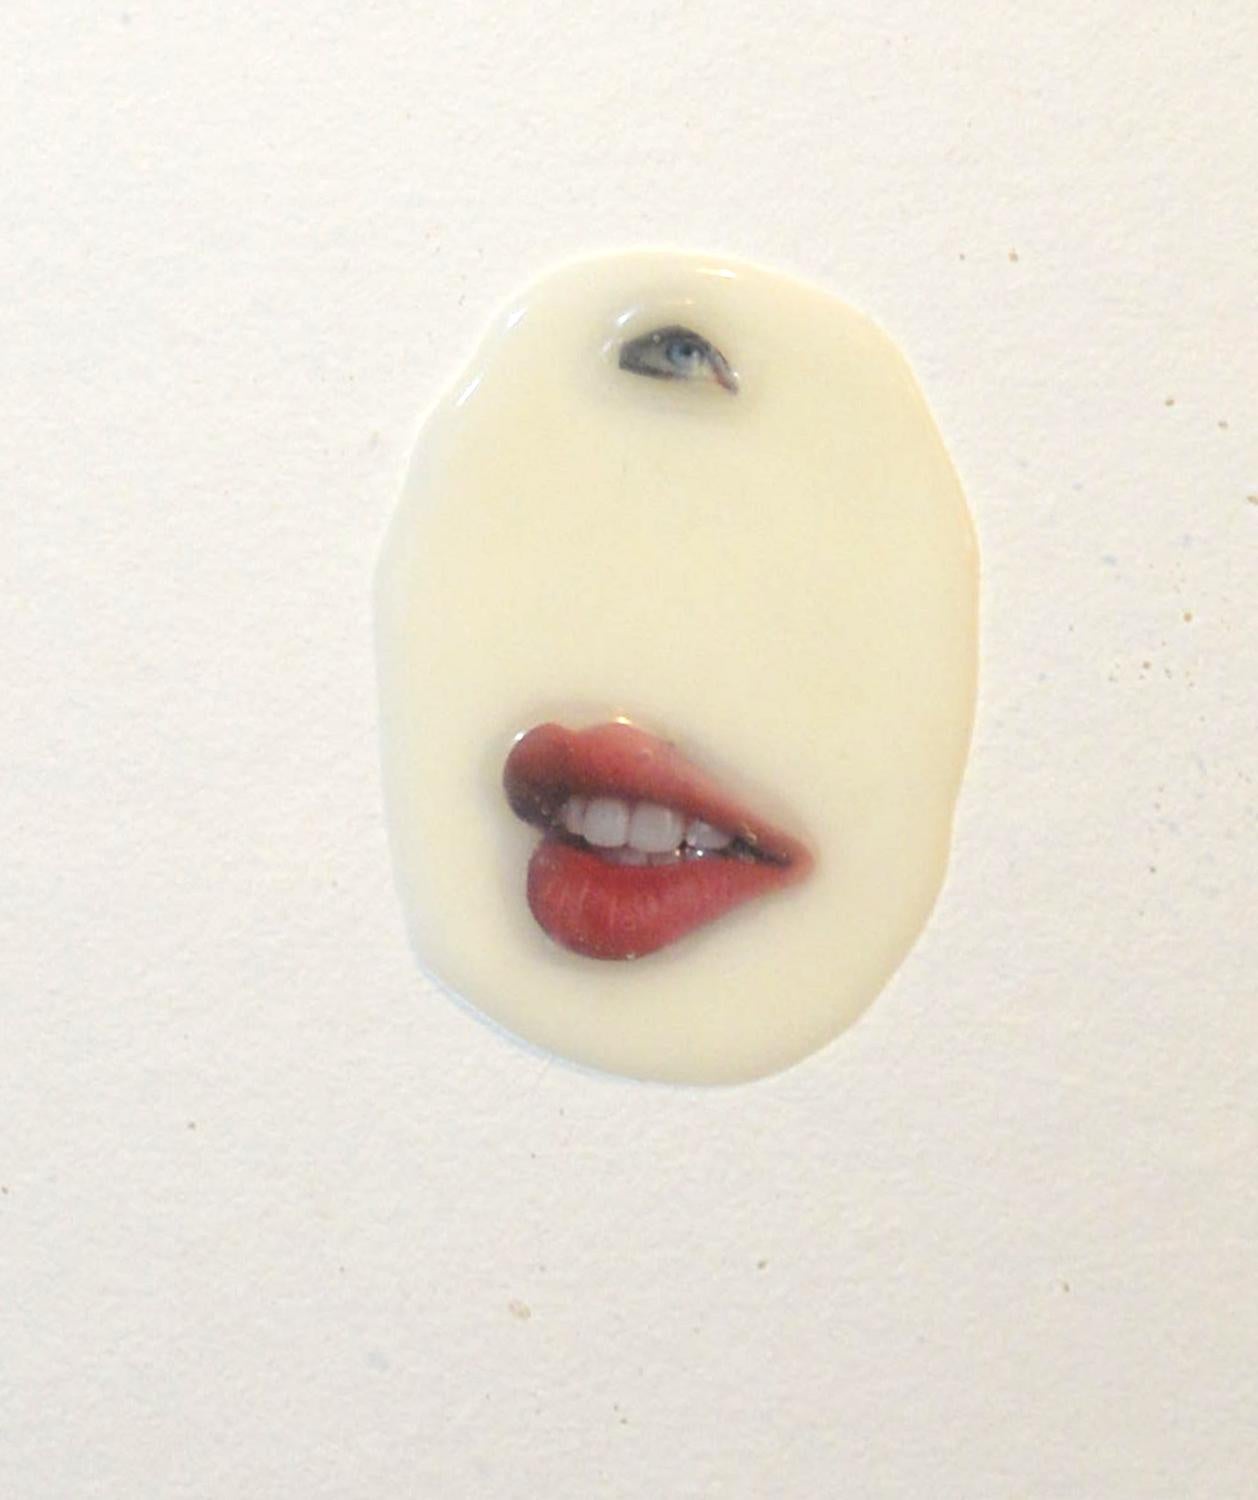 Mouth, Jaume Plensa, 2003, Resin and collage on paper 2